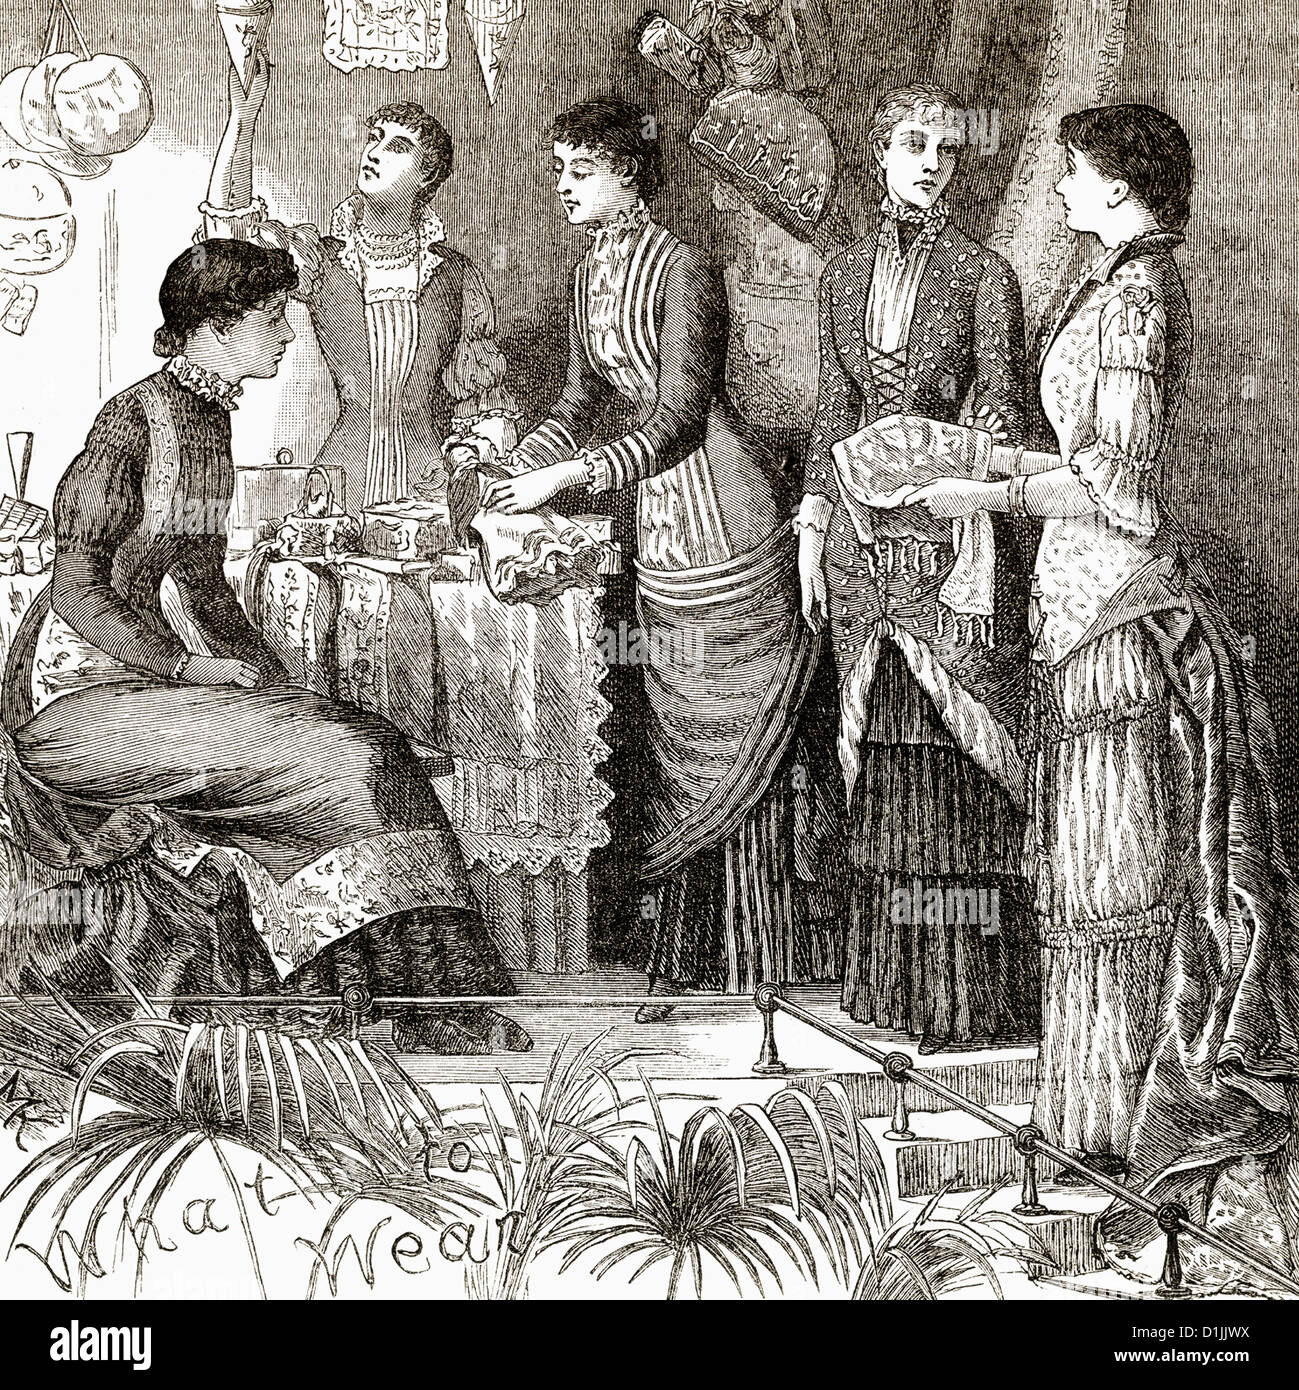 Historical drawing from England, 19th century, women's fashion around 1881, Stock Photo